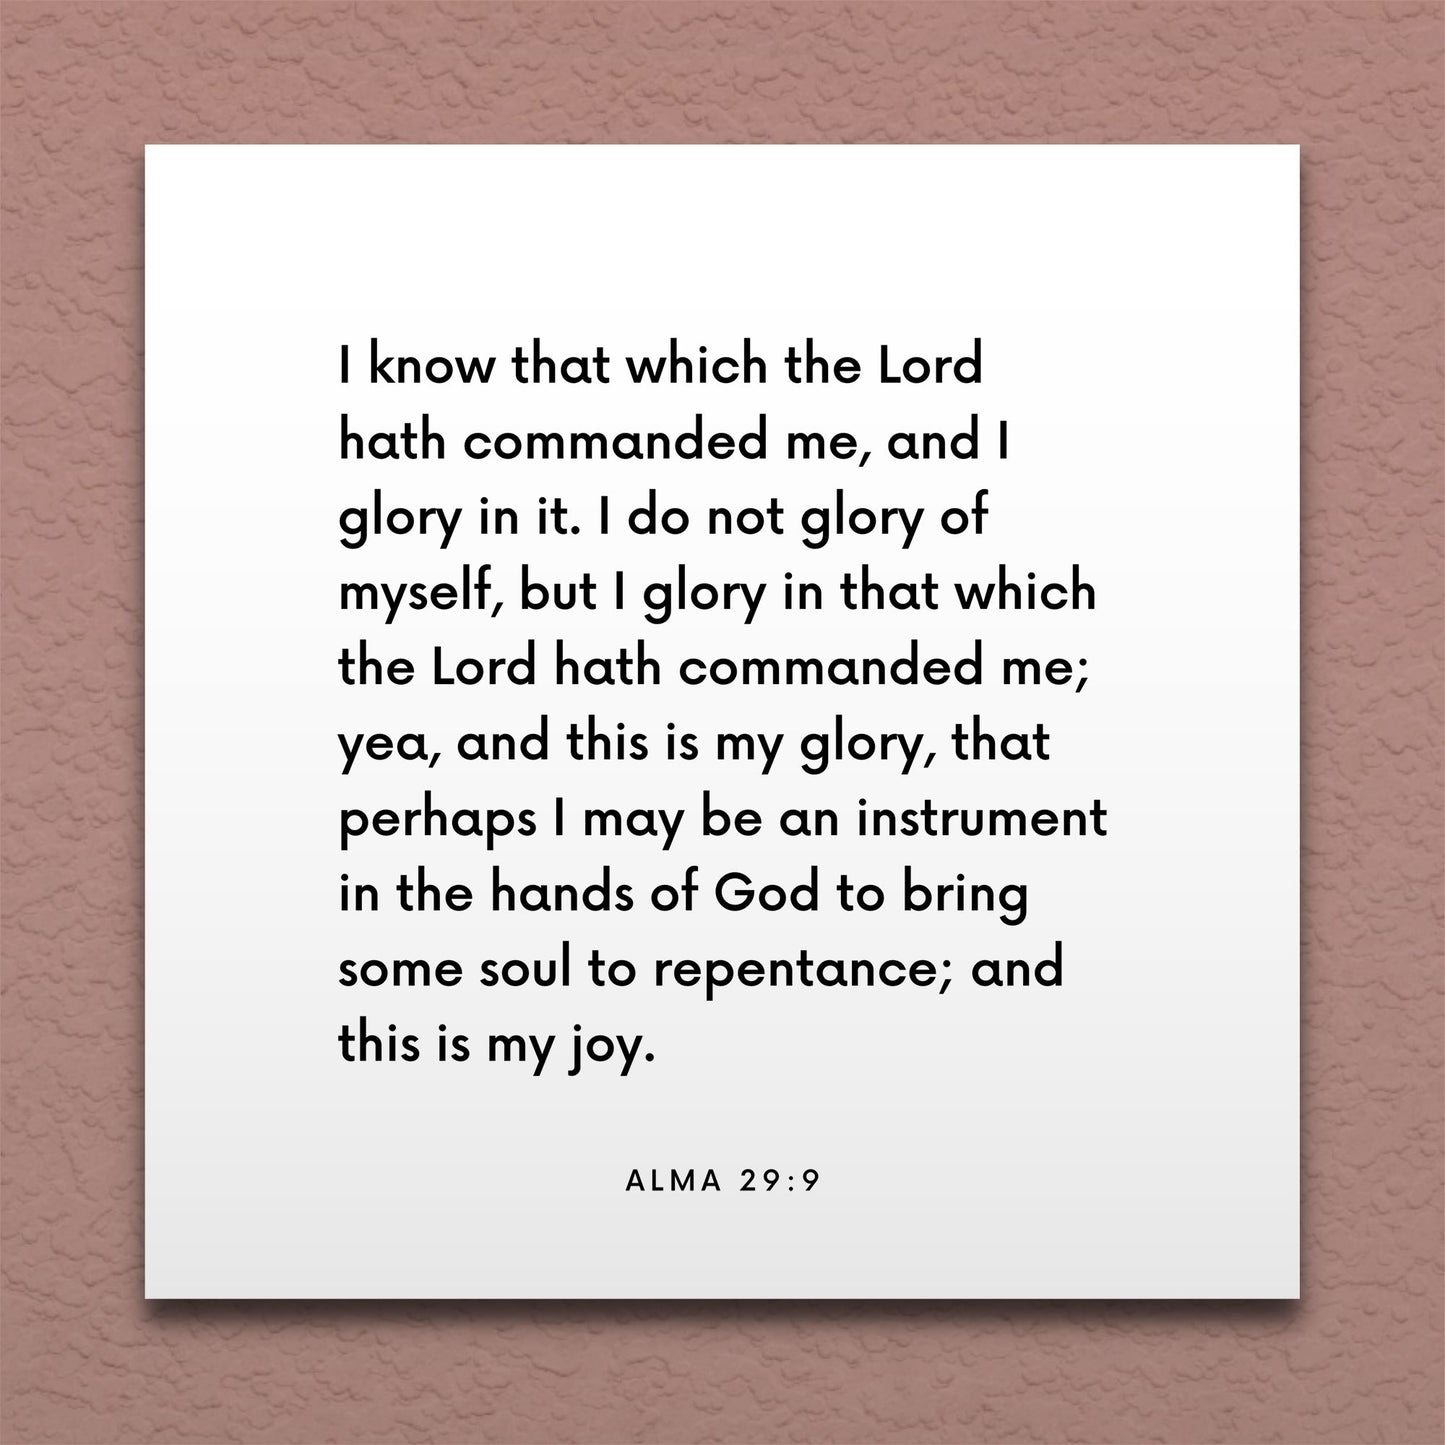 Wall-mounted scripture tile for Alma 29:9 - "This is my glory, that perhaps I may be an instrument"